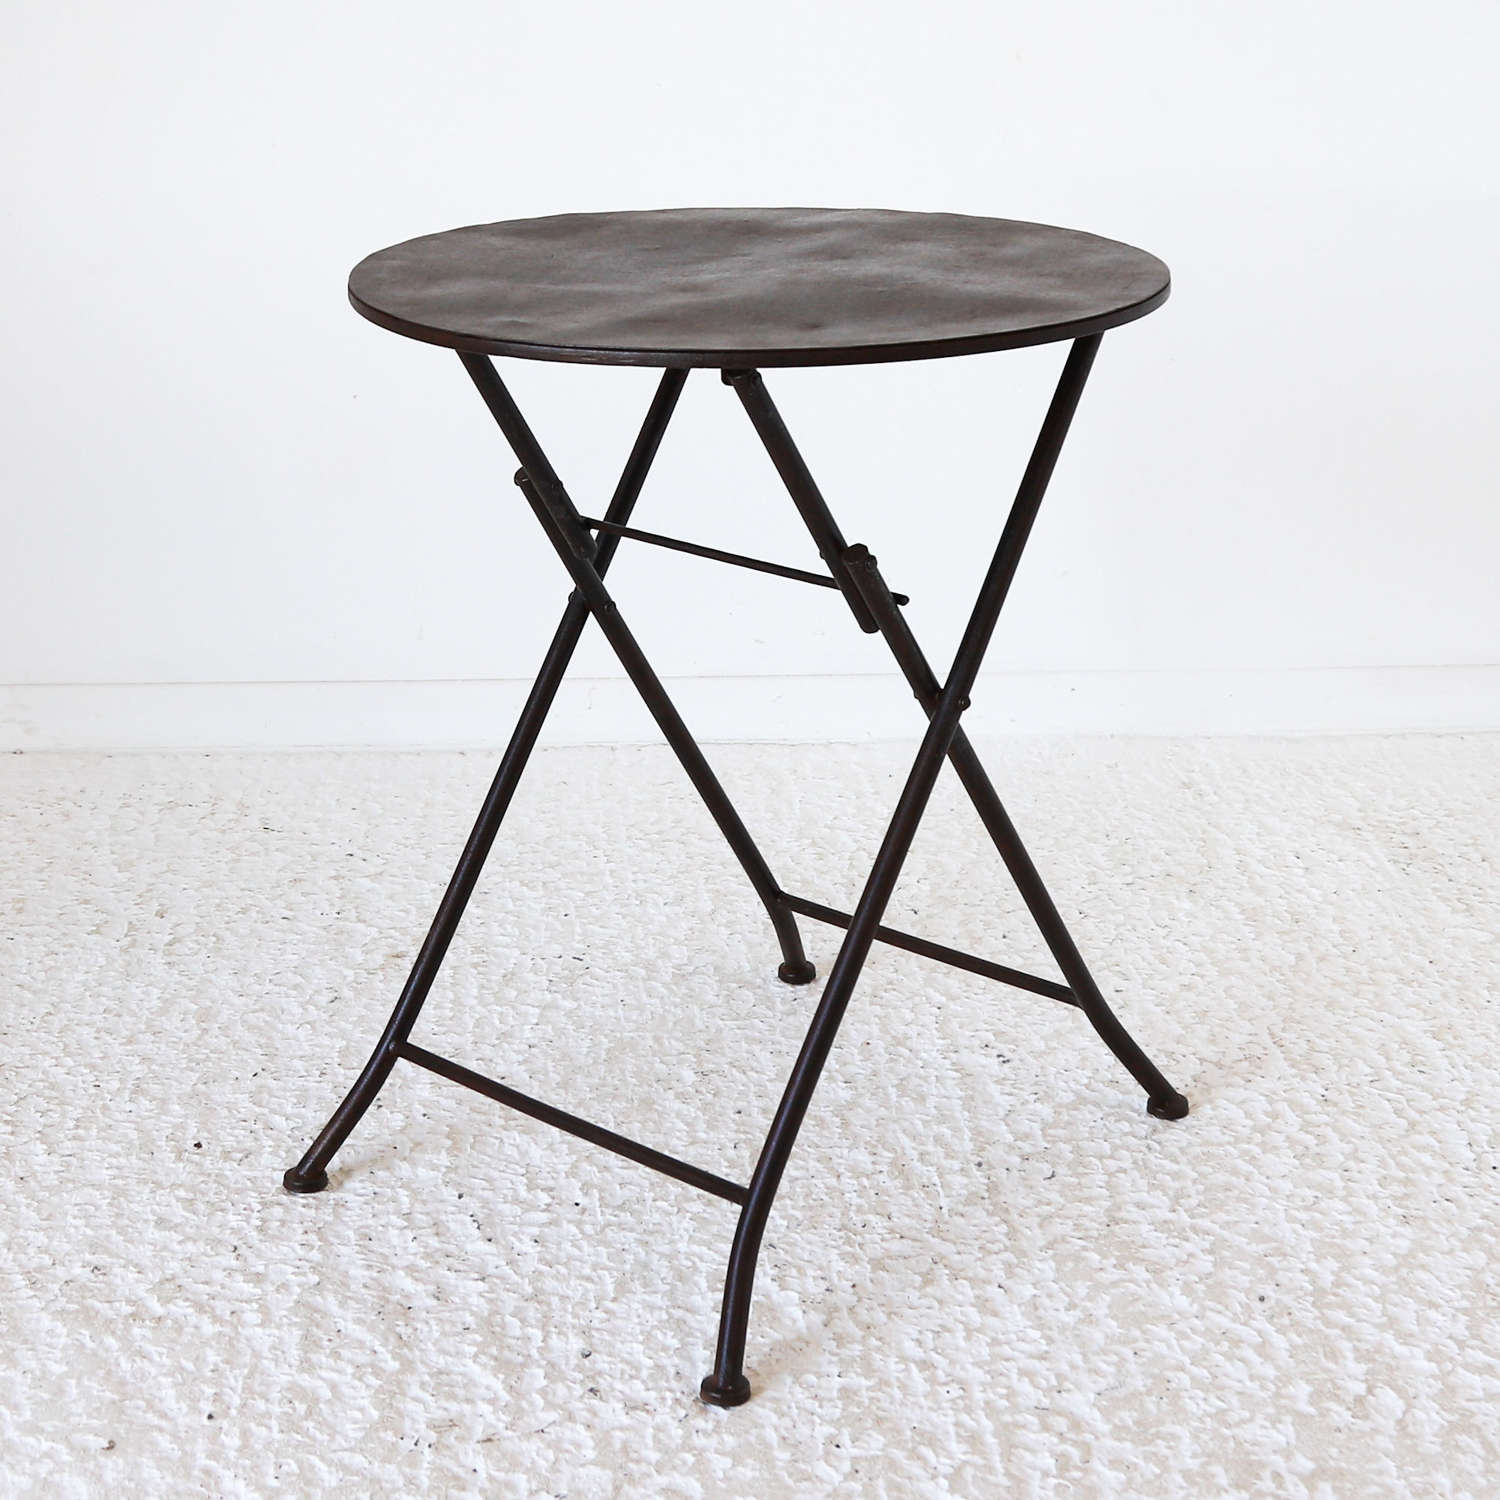 French 1930s folding metal bistro table